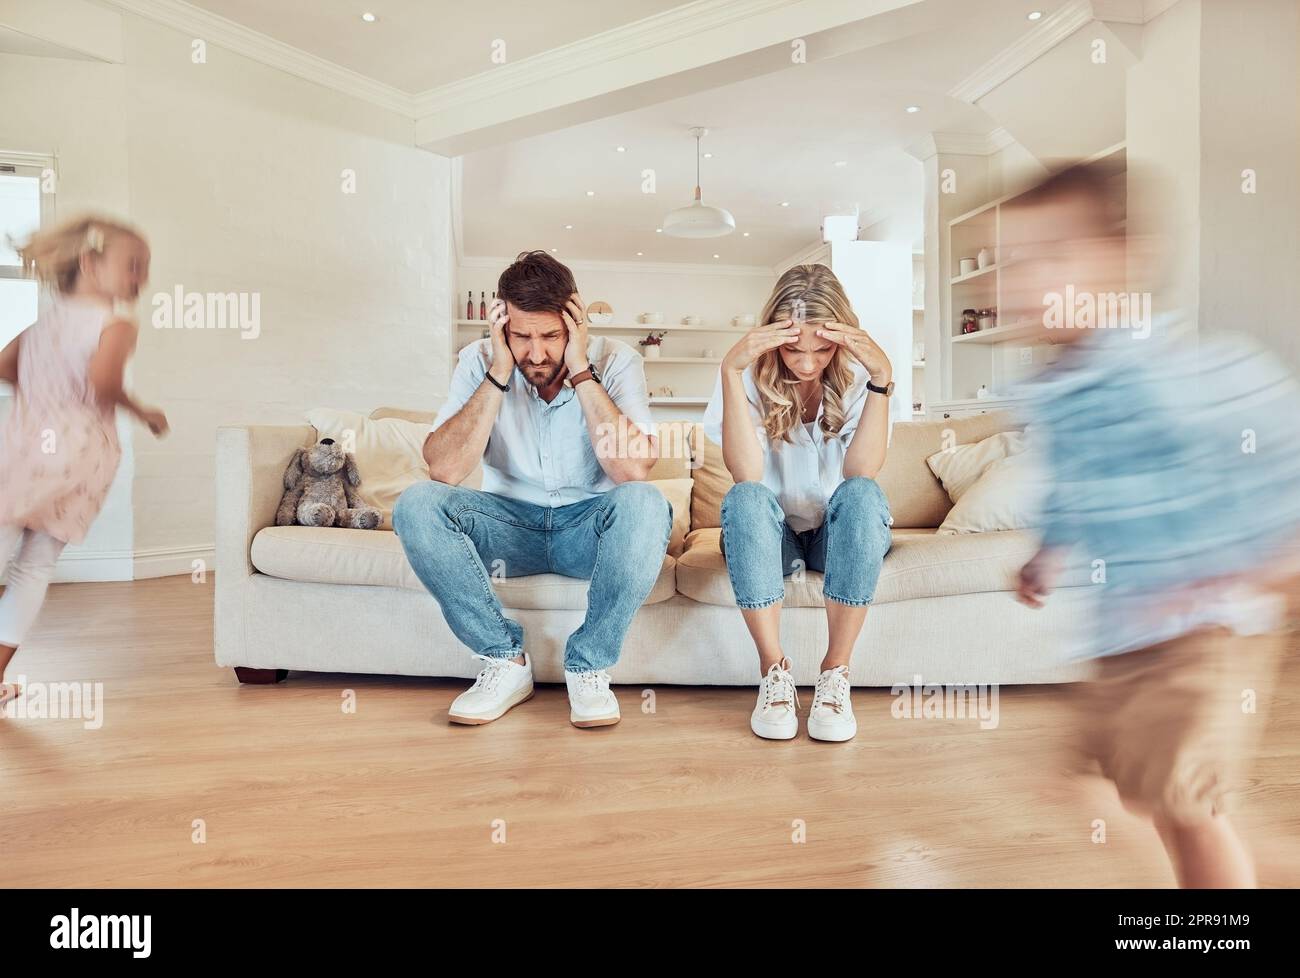 Young caucasian parents suffering from a headache while their children run in the lounge at home. Carefree playful little siblings running in the living room while their mom and dad look tired Stock Photo